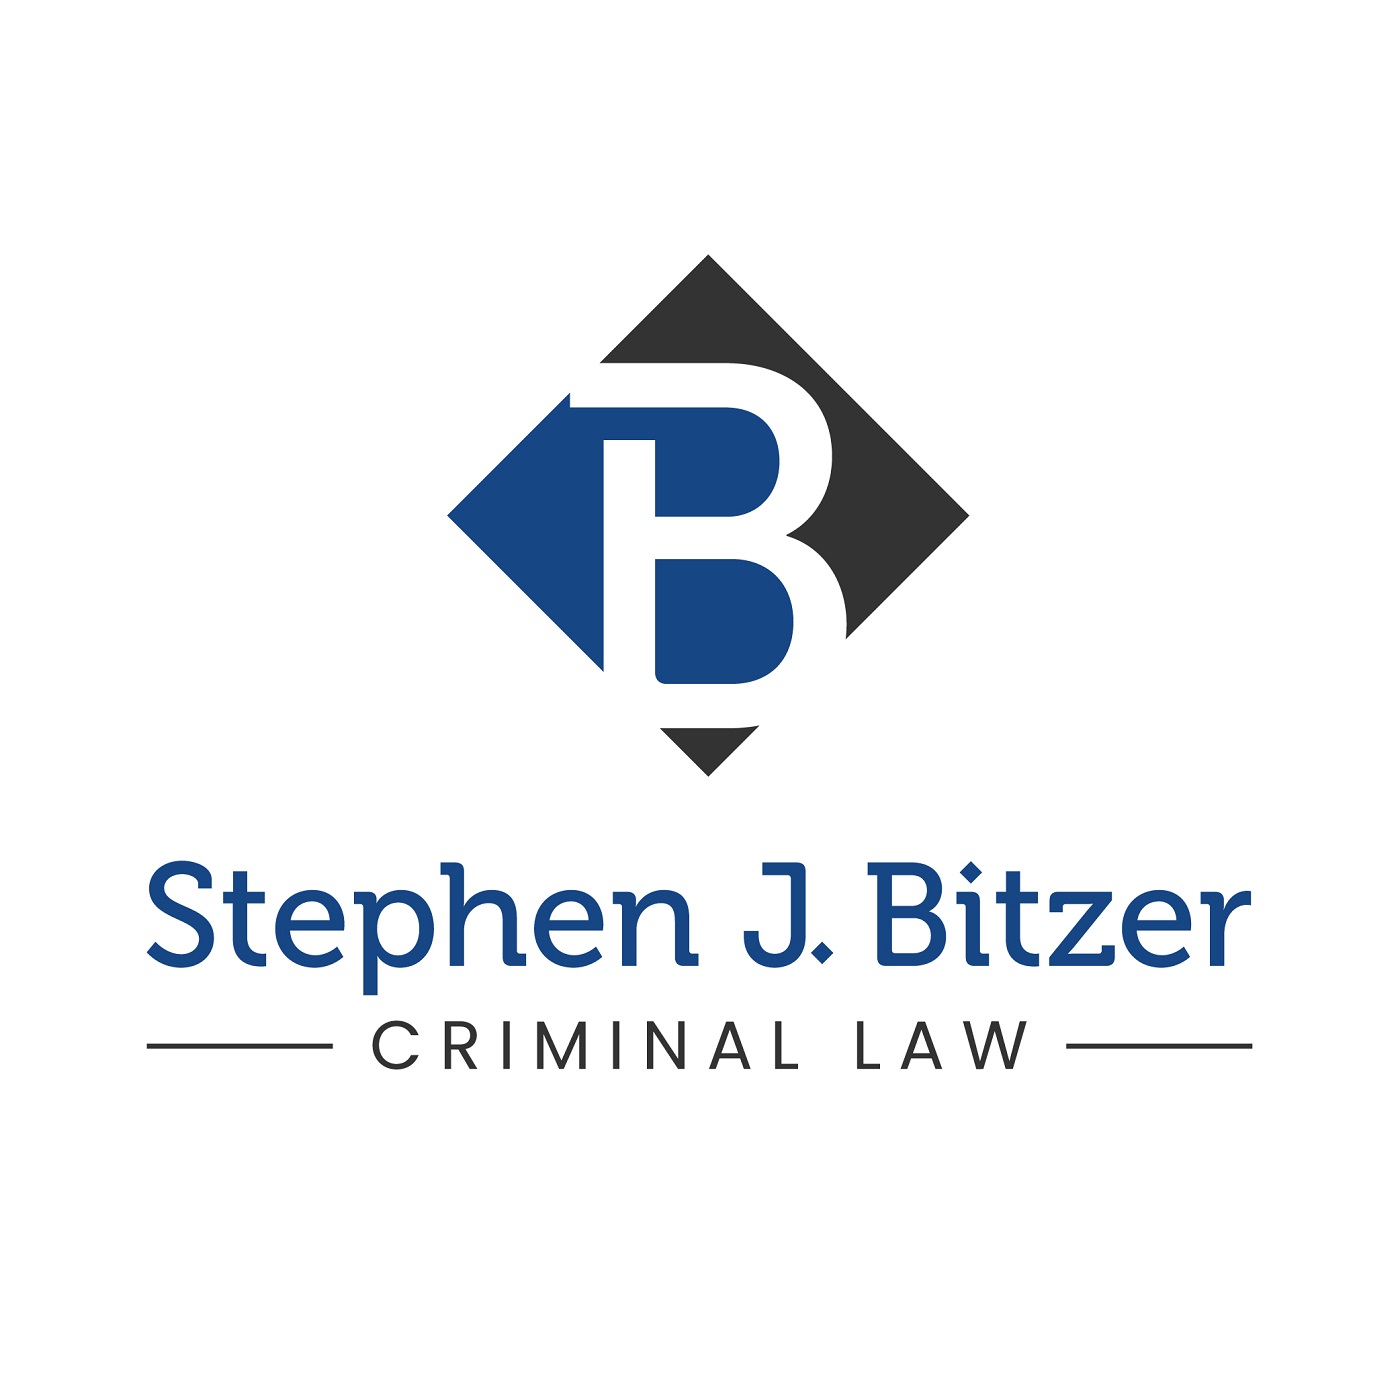 Hire The Top Defense Firm In Cochrane To Dispute Your Criminal Charge